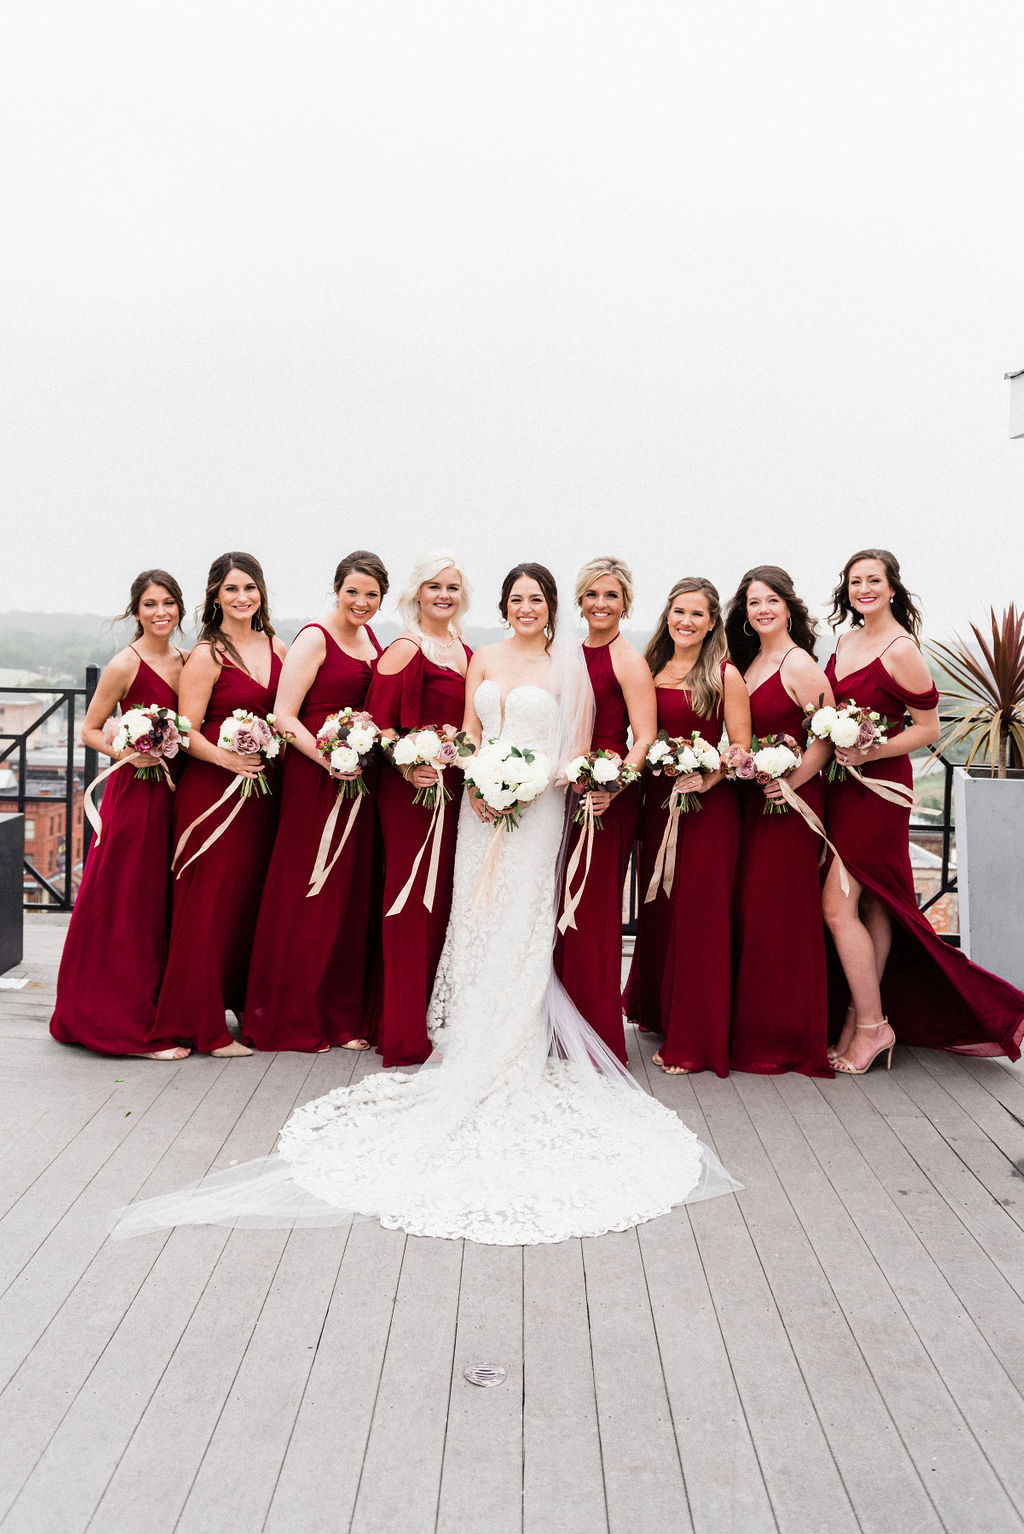 A bride and her bridesmaids smiling before her wedding